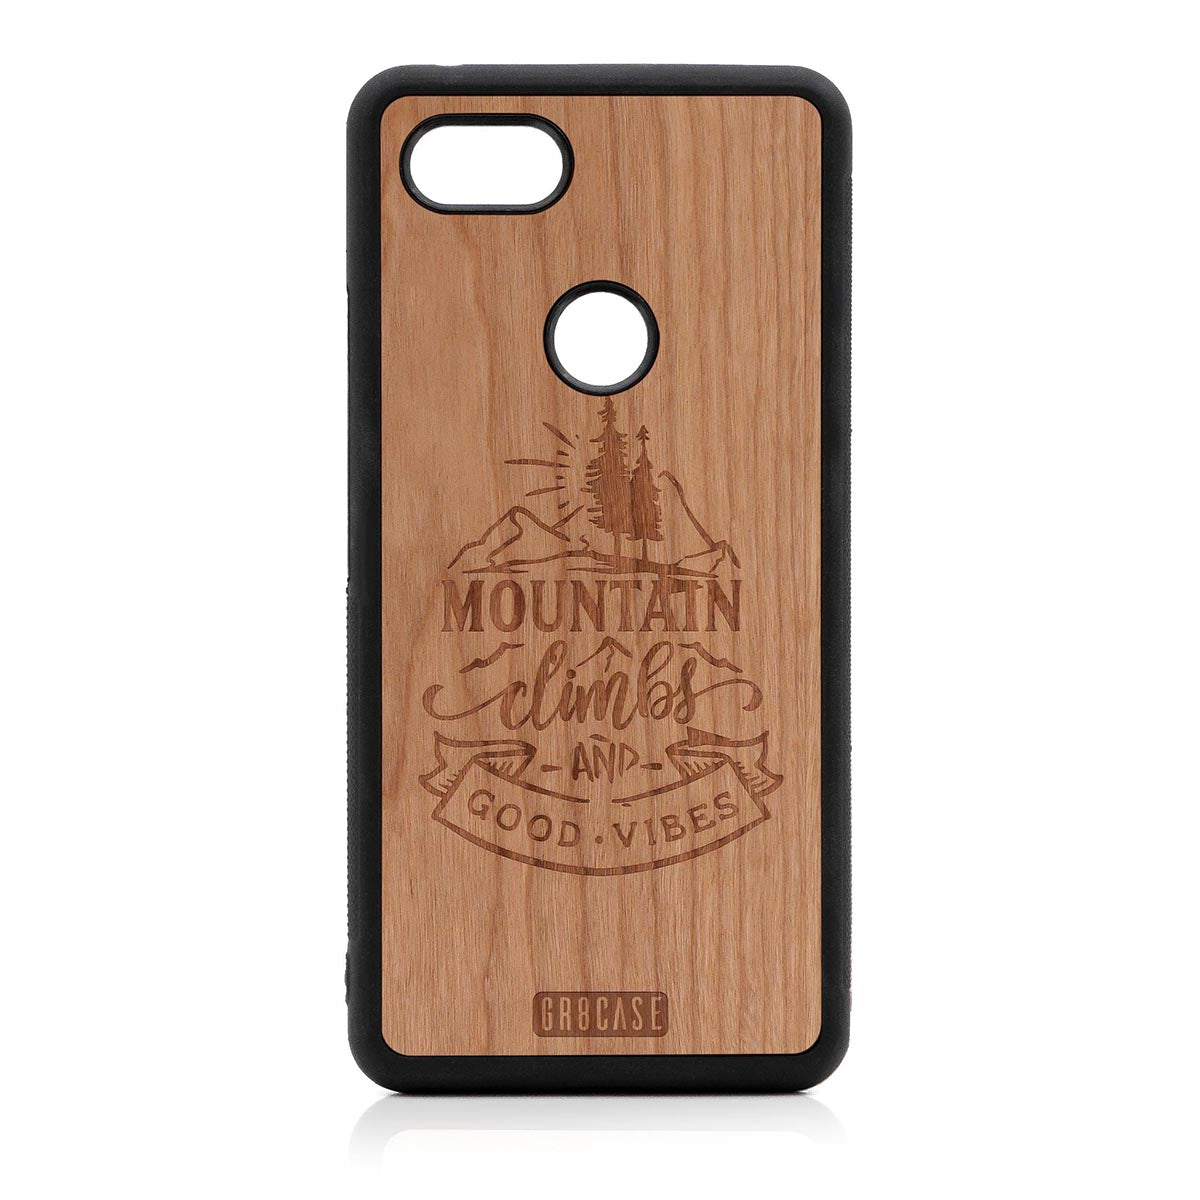 Mountain Climbs And Good Vibes Design Wood Case Google Pixel 3 XL by GR8CASE